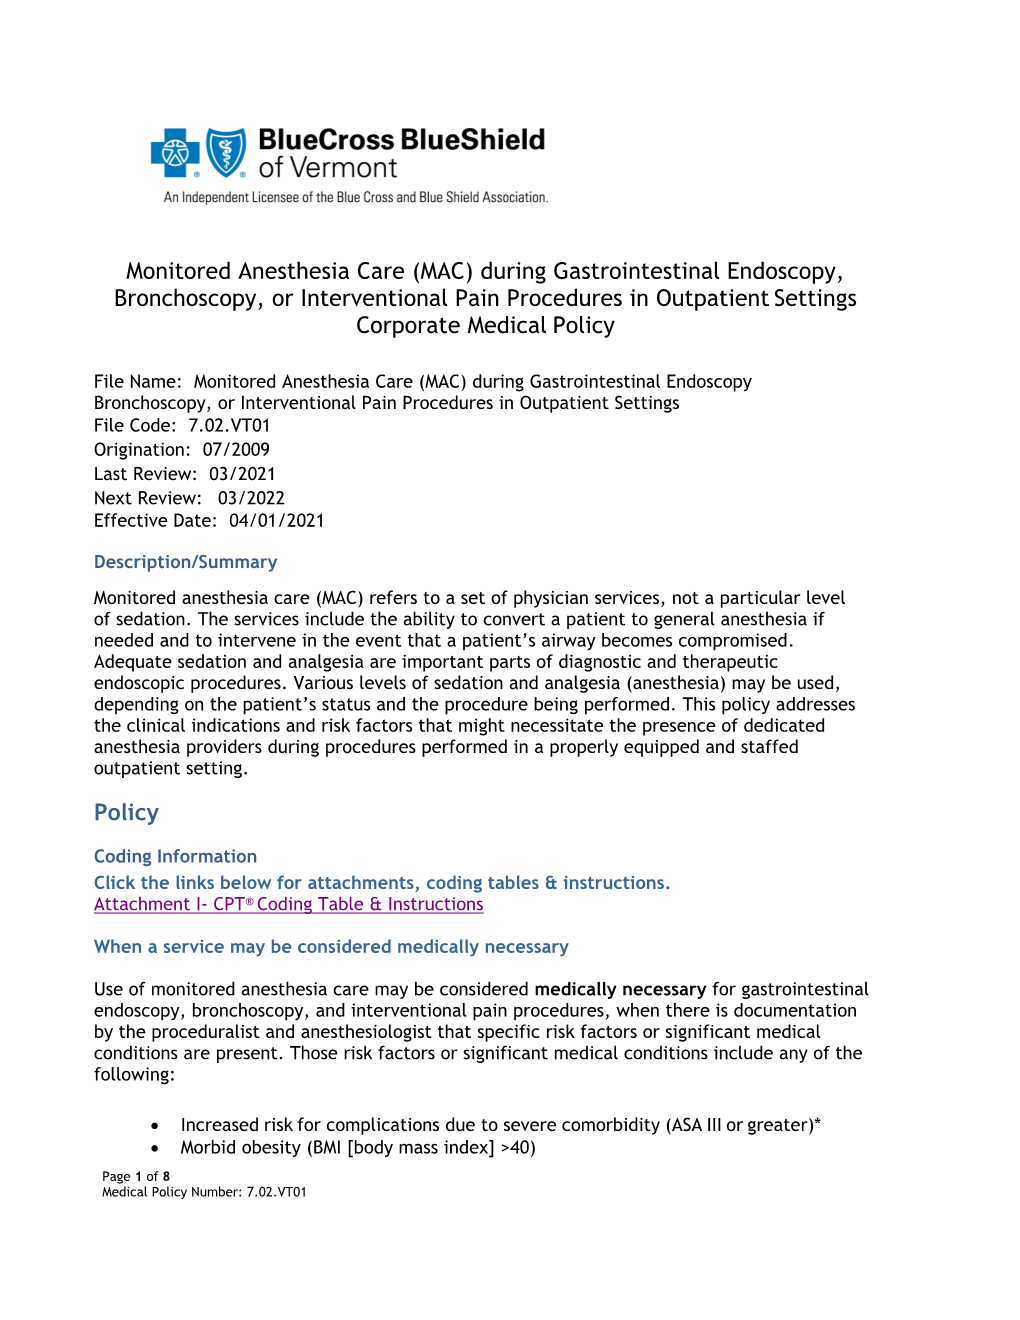 Monitored Anesthesia Care (MAC) During Gastrointestinal Endoscopy, Bronchoscopy, Or Interventional Pain Procedures in Outpatient Settings Corporate Medical Policy